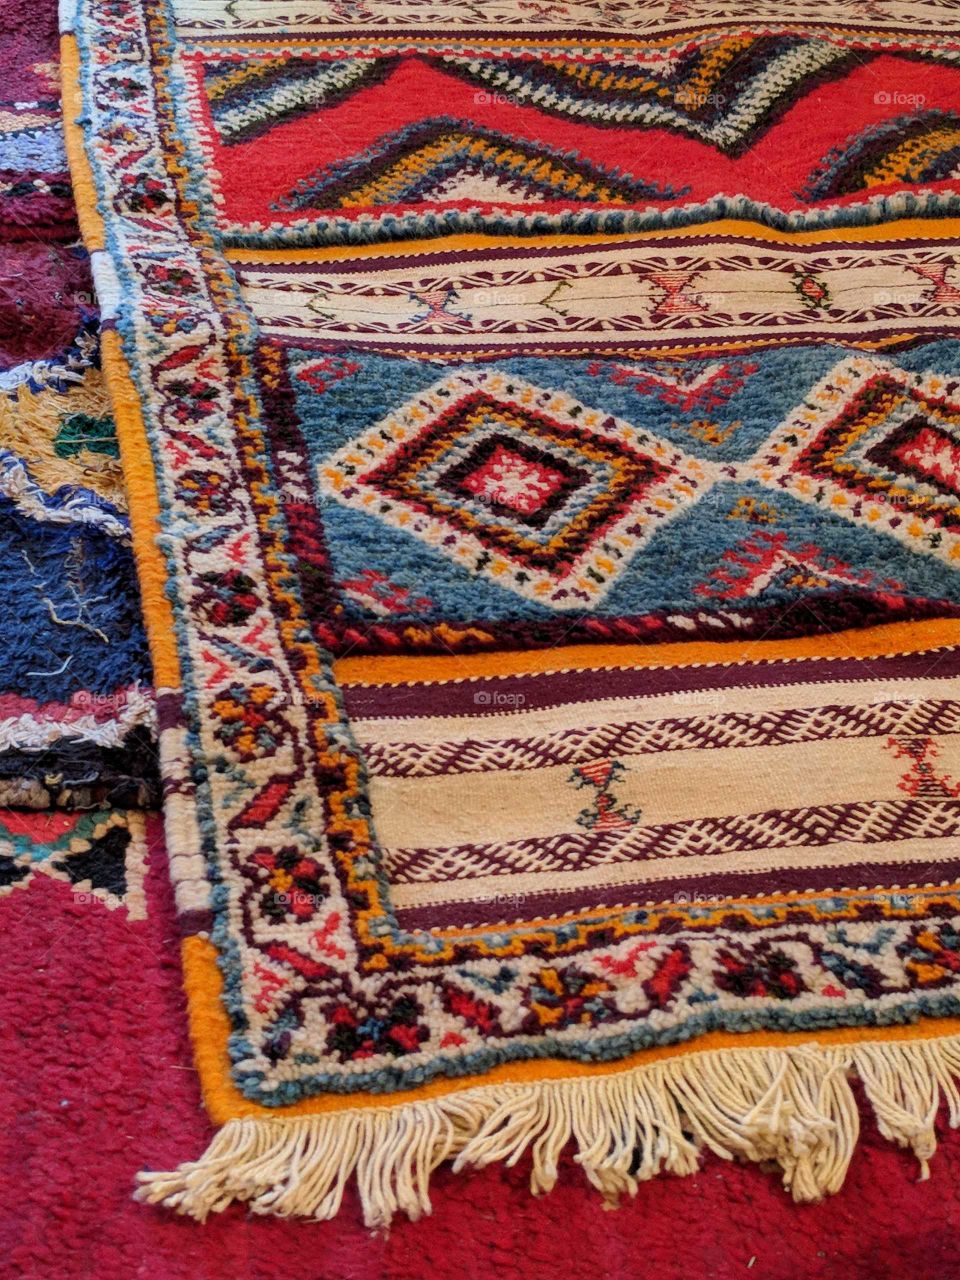 Handmade, Weaved, Bedouin (Tribal), Ornate Rug with Colorful Pattern and Fringe in Small Village in Morocco